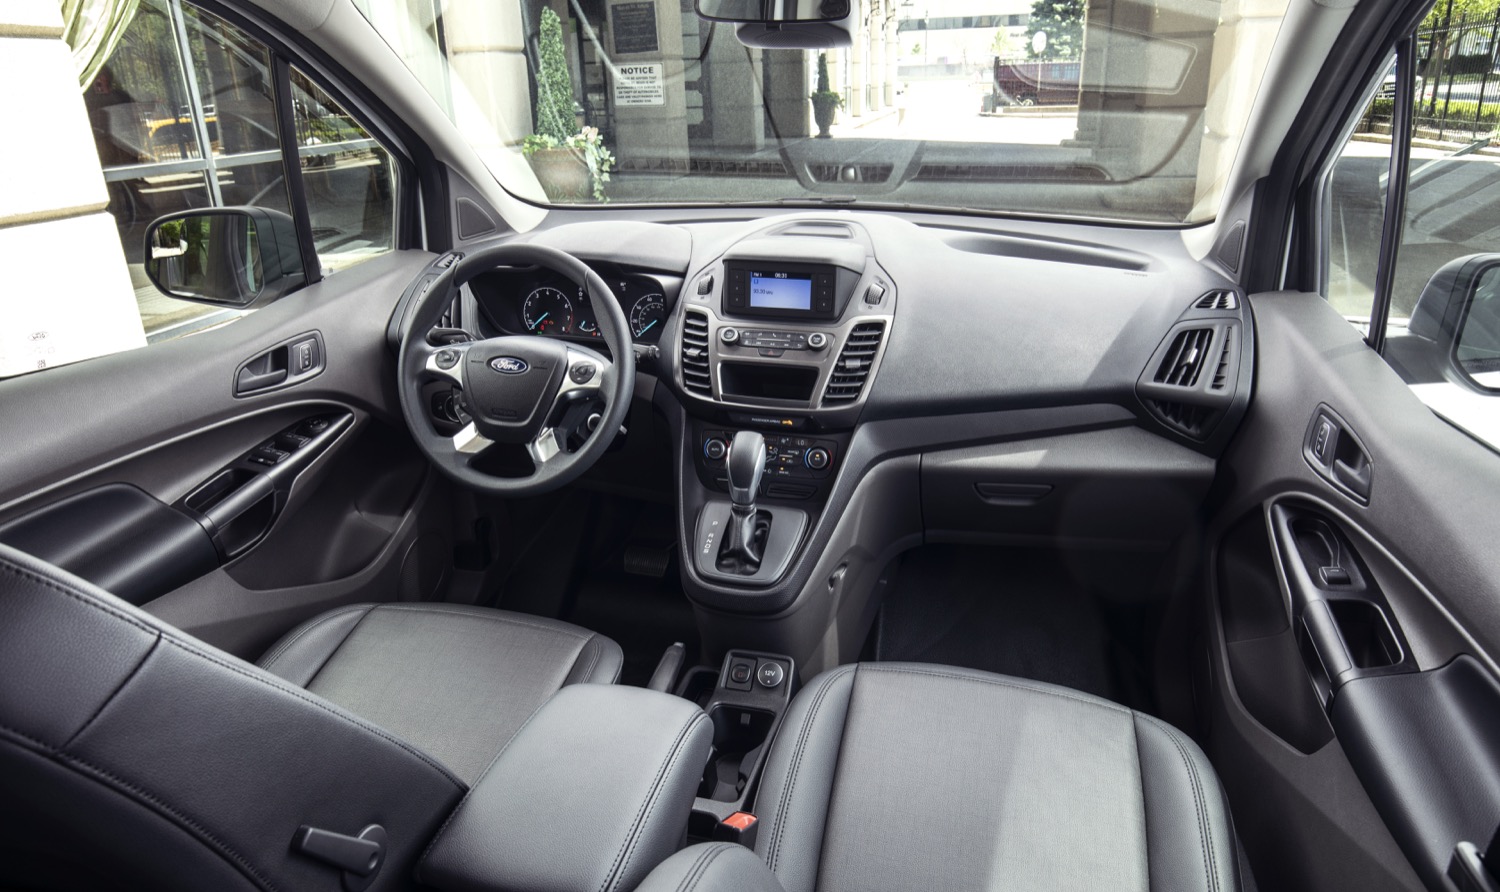 2020 Ford Transit Connect: Here's What's New And Different